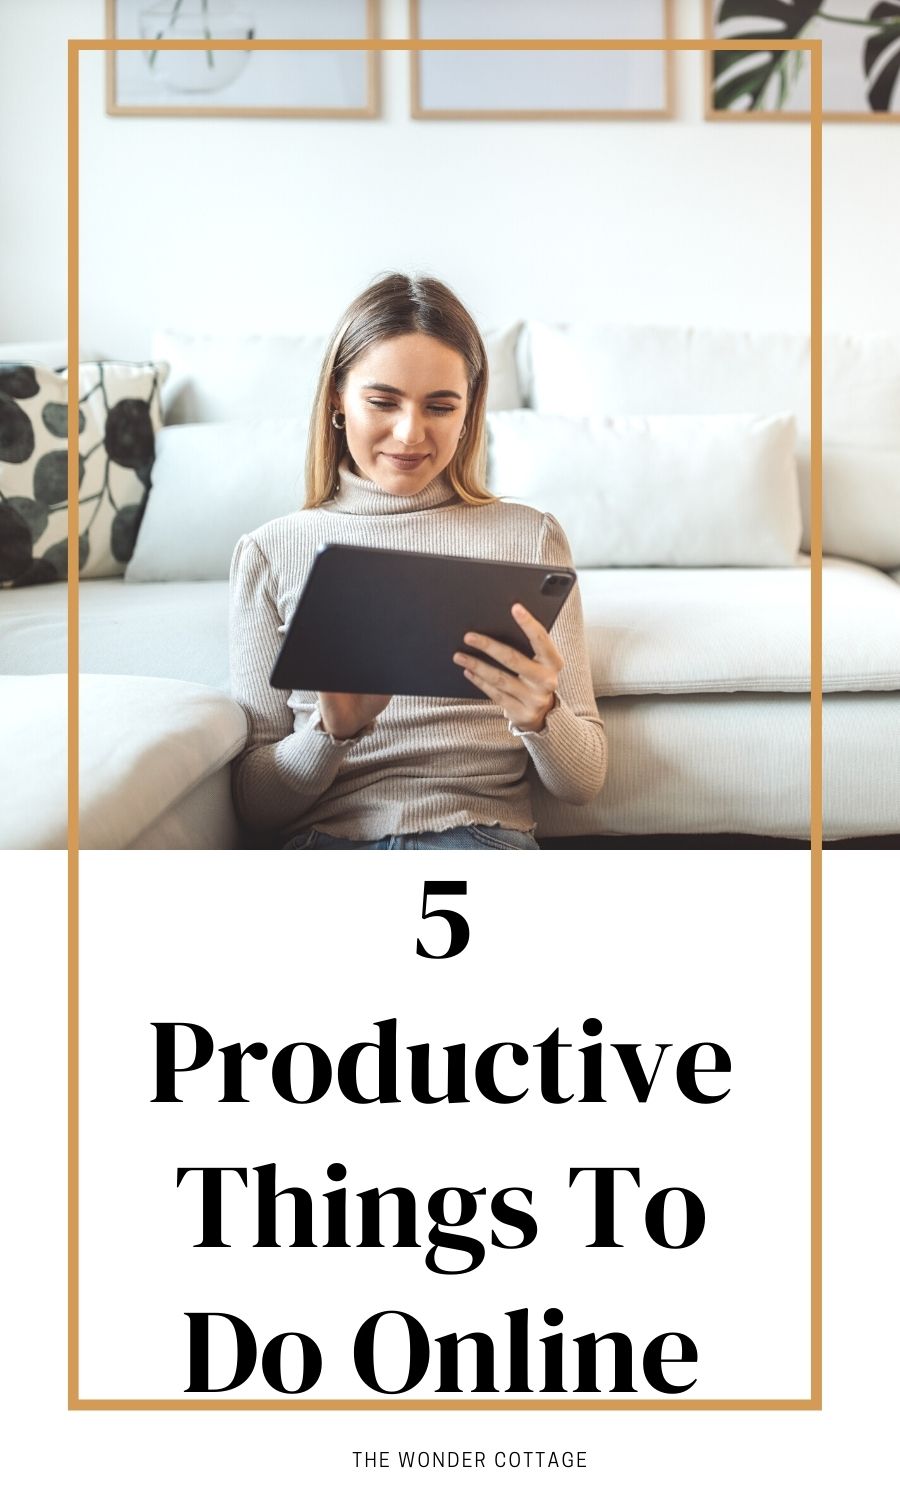 5 productive things to do online